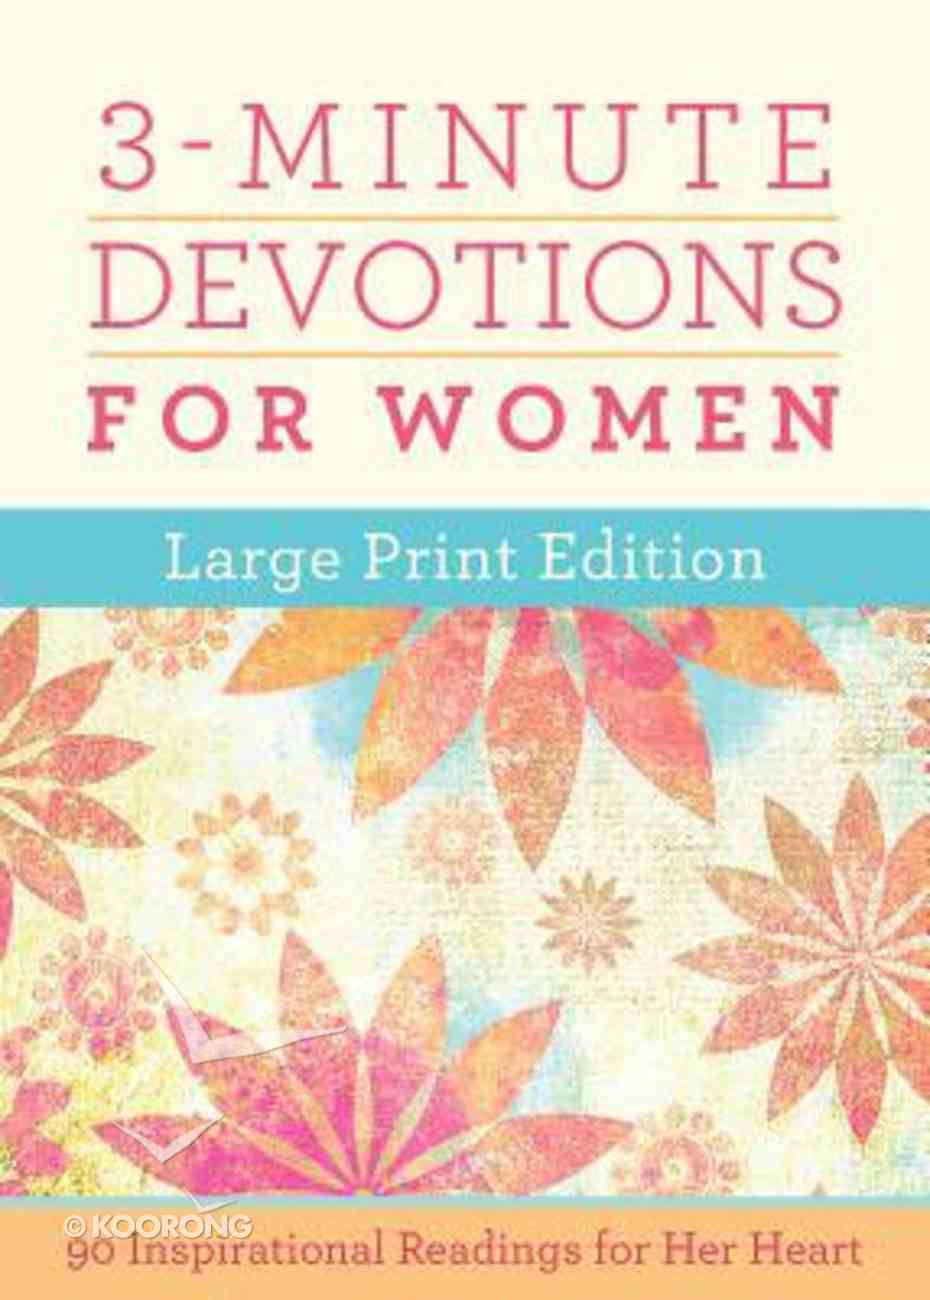 3-Minute Devotions For Women: 180 Inspirational Readings For Her Heart (Large Print Edition) Paperback